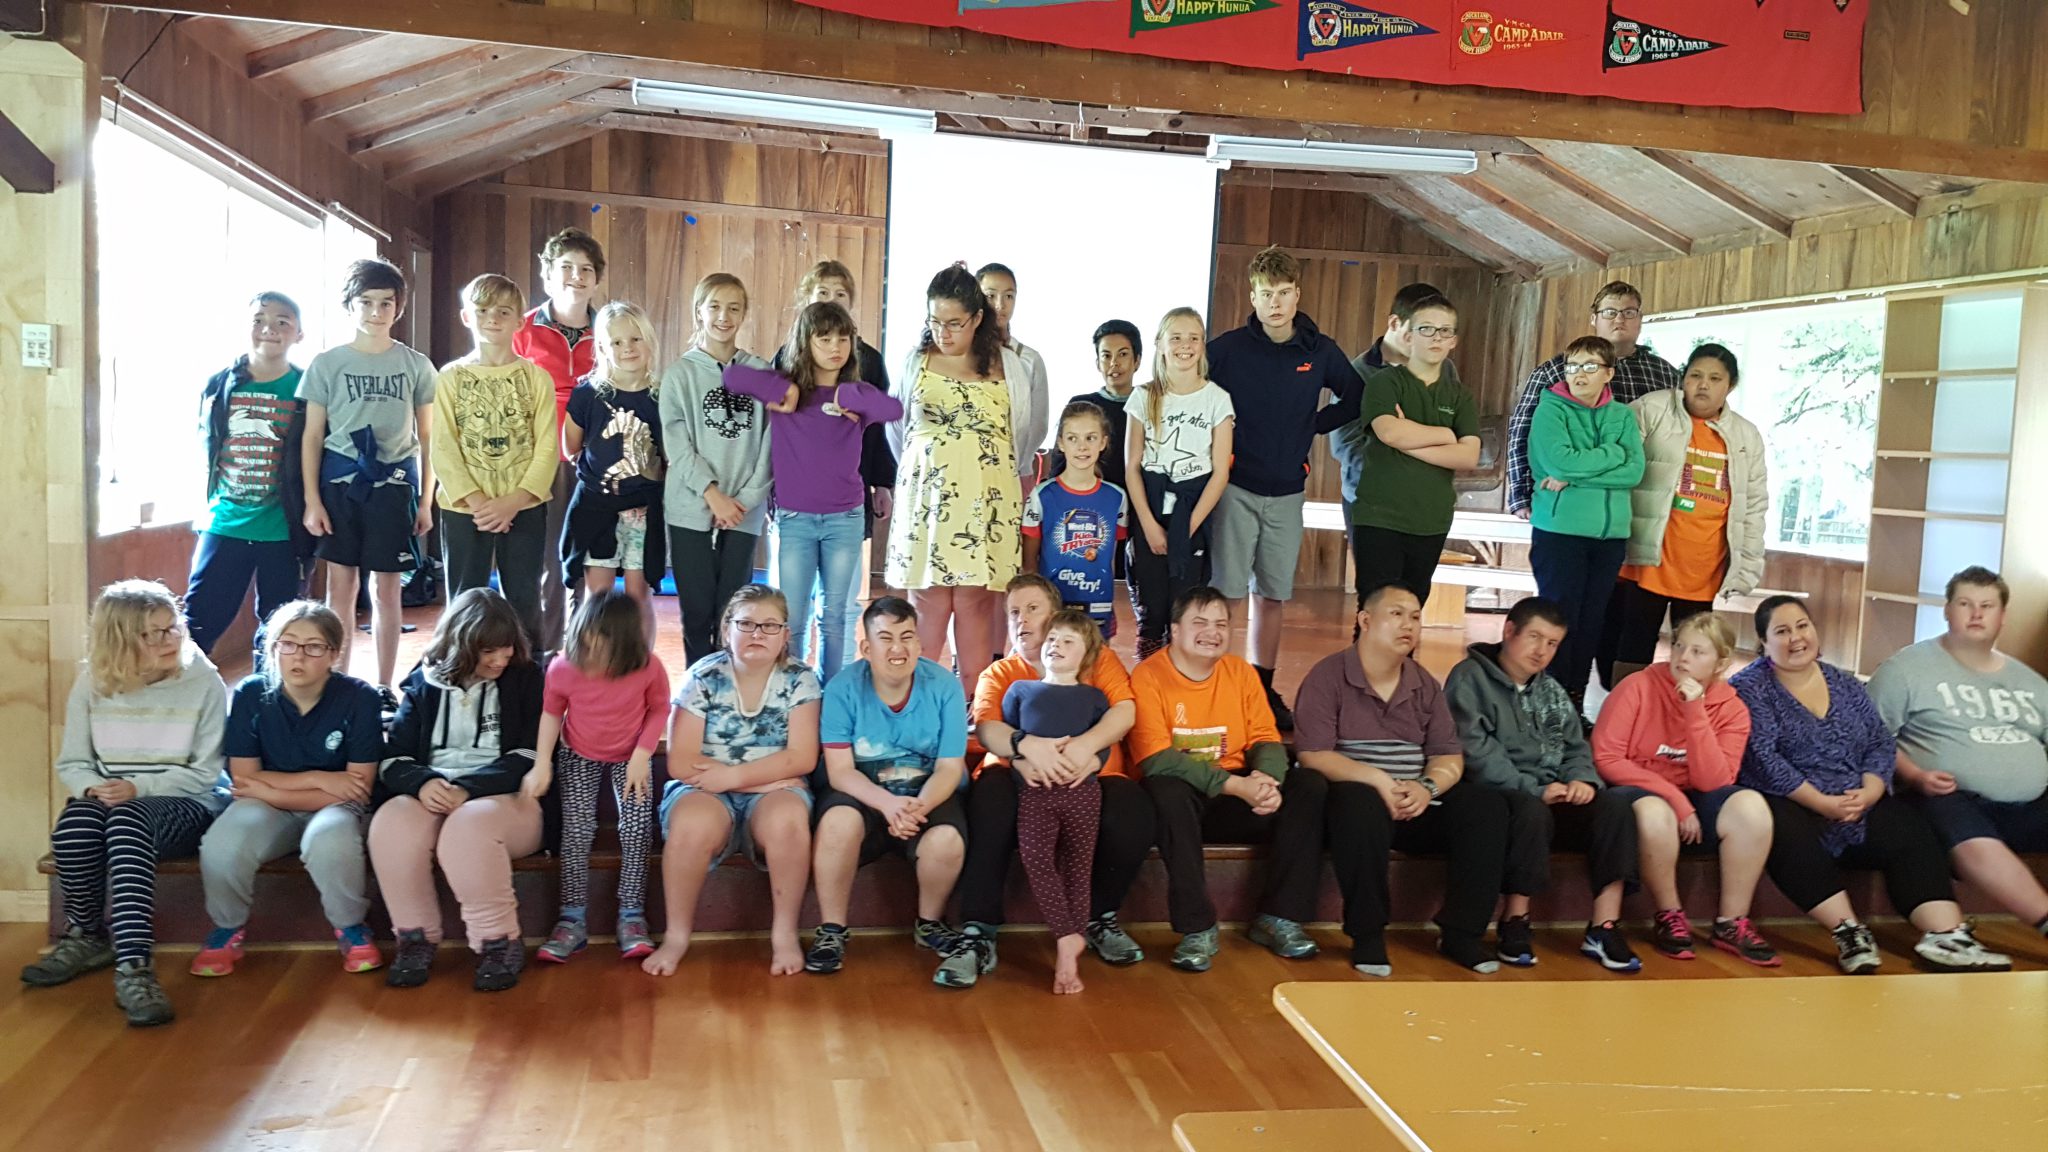 Some Of The Camp Group, Camp Adair 2018